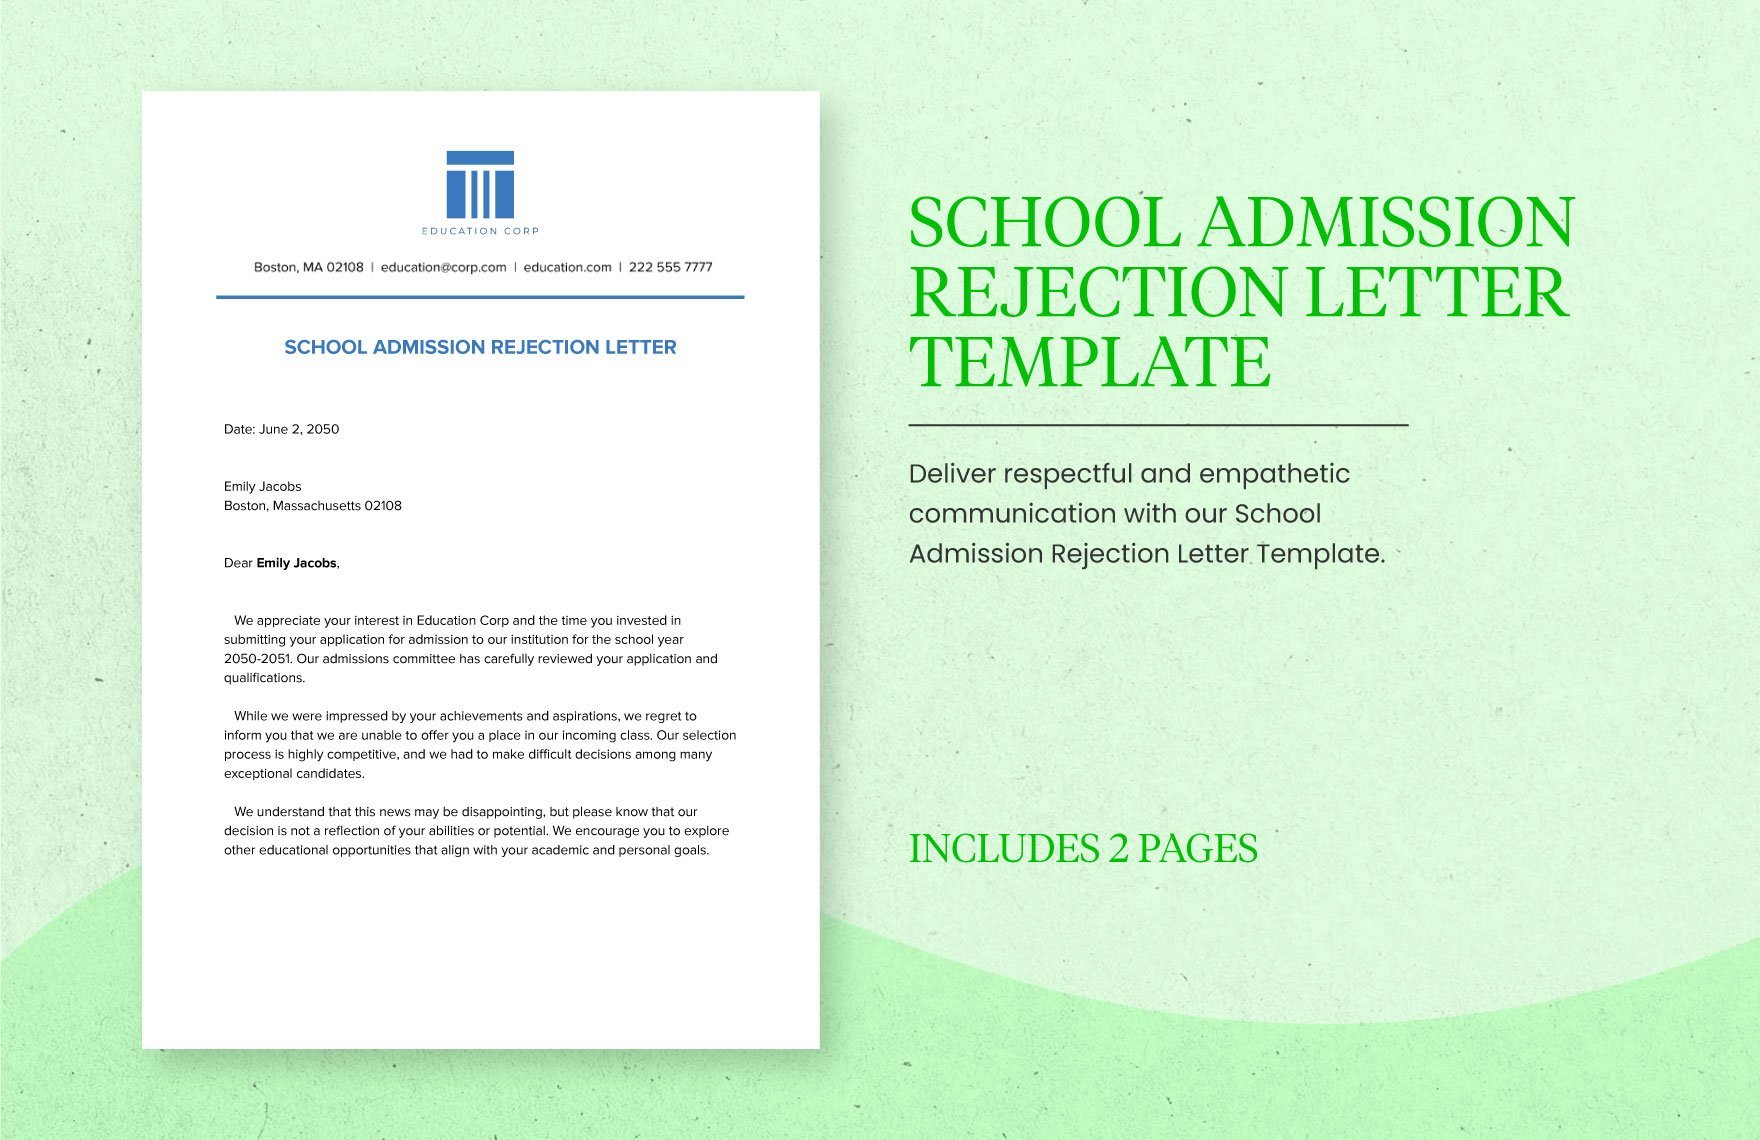 School Admission Rejection Letter Template in Word, Google Docs, PDF